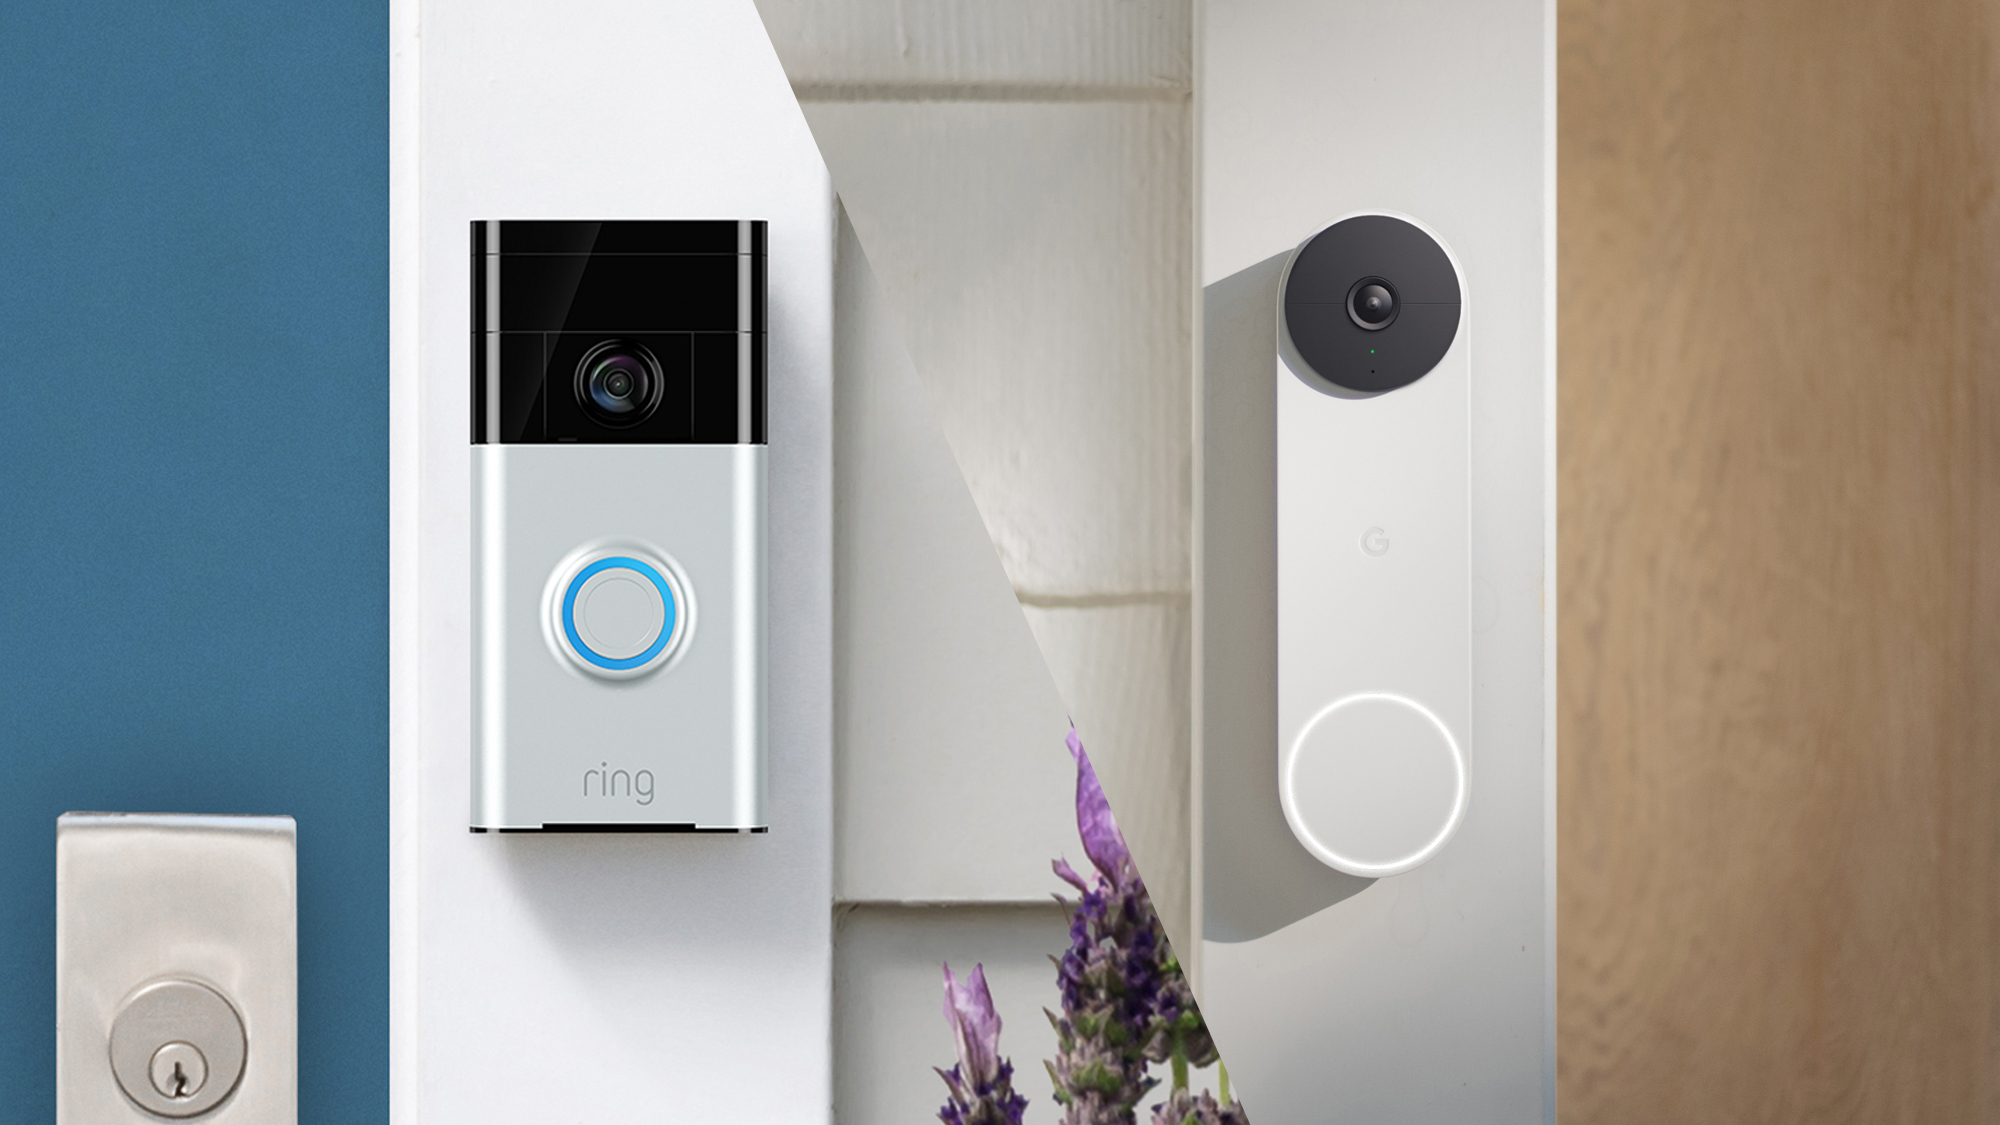 Michelangelo Groet chirurg Ring vs. Nest: Ring Video Doorbell and Nest Doorbell (battery) compared |  Tom's Guide